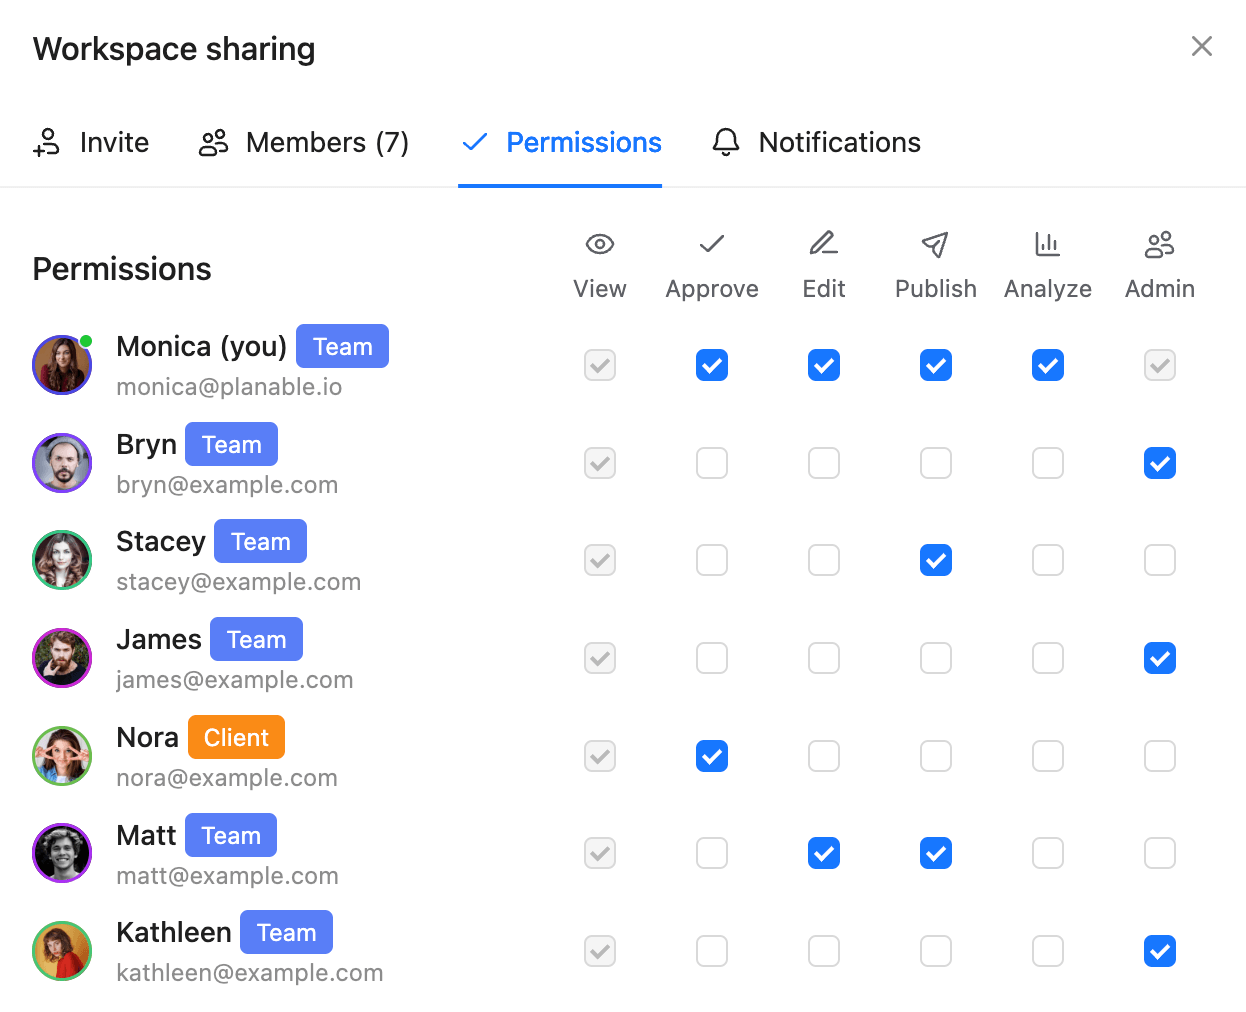 Workspace sharing permissions in Planable showing members with various roles and specific permissions for viewing, approving, editing, publishing, analyzing, and administering content.